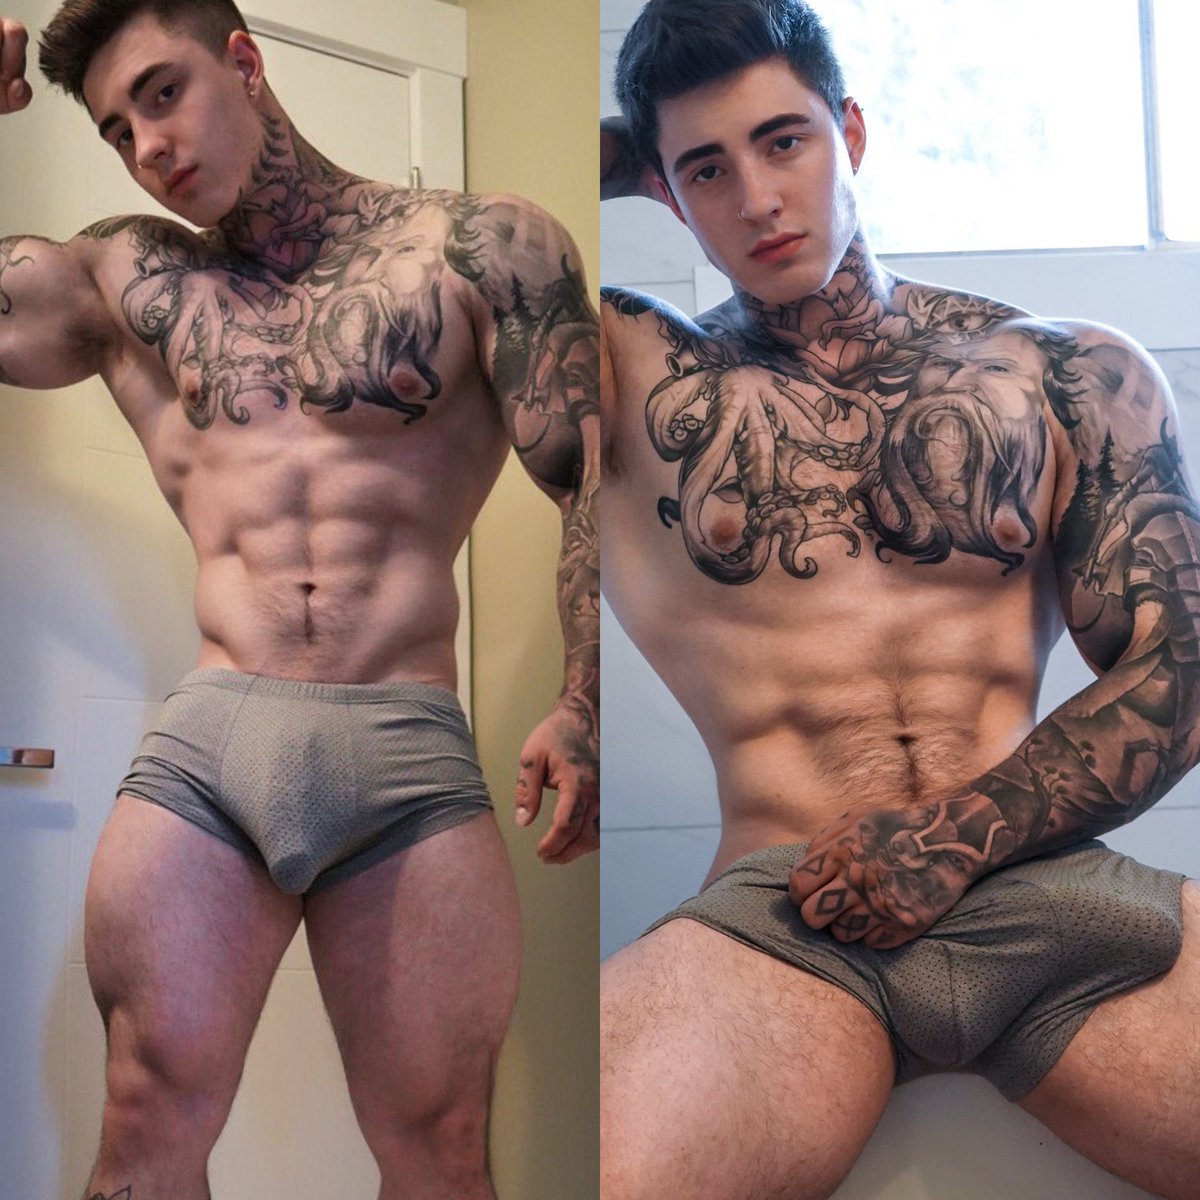 Free Onlyfans Trial